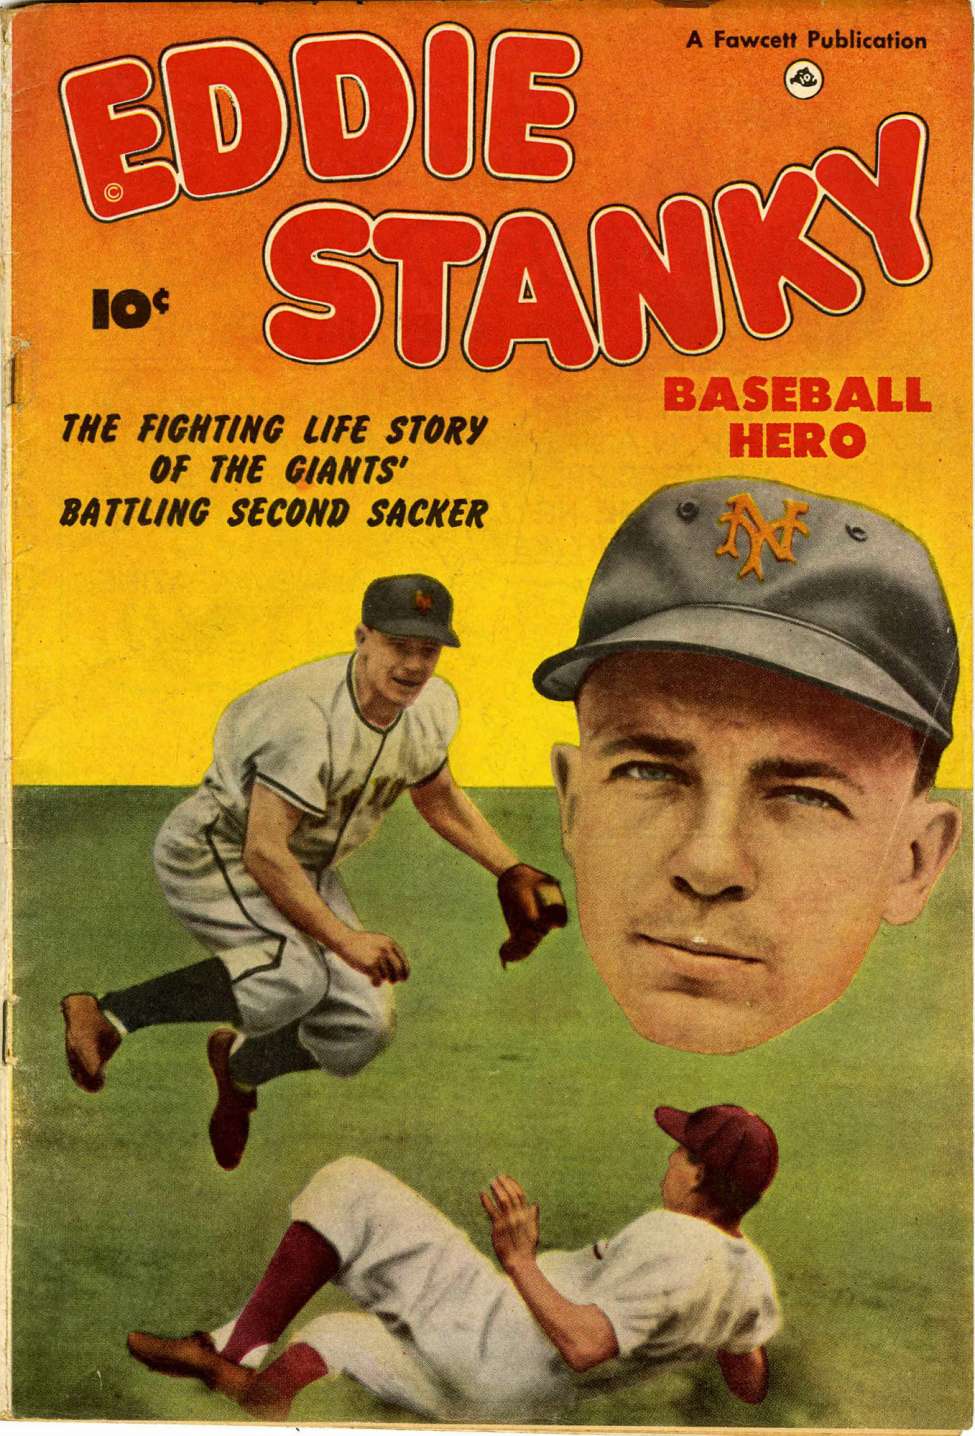 Book Cover For Eddie Stanky